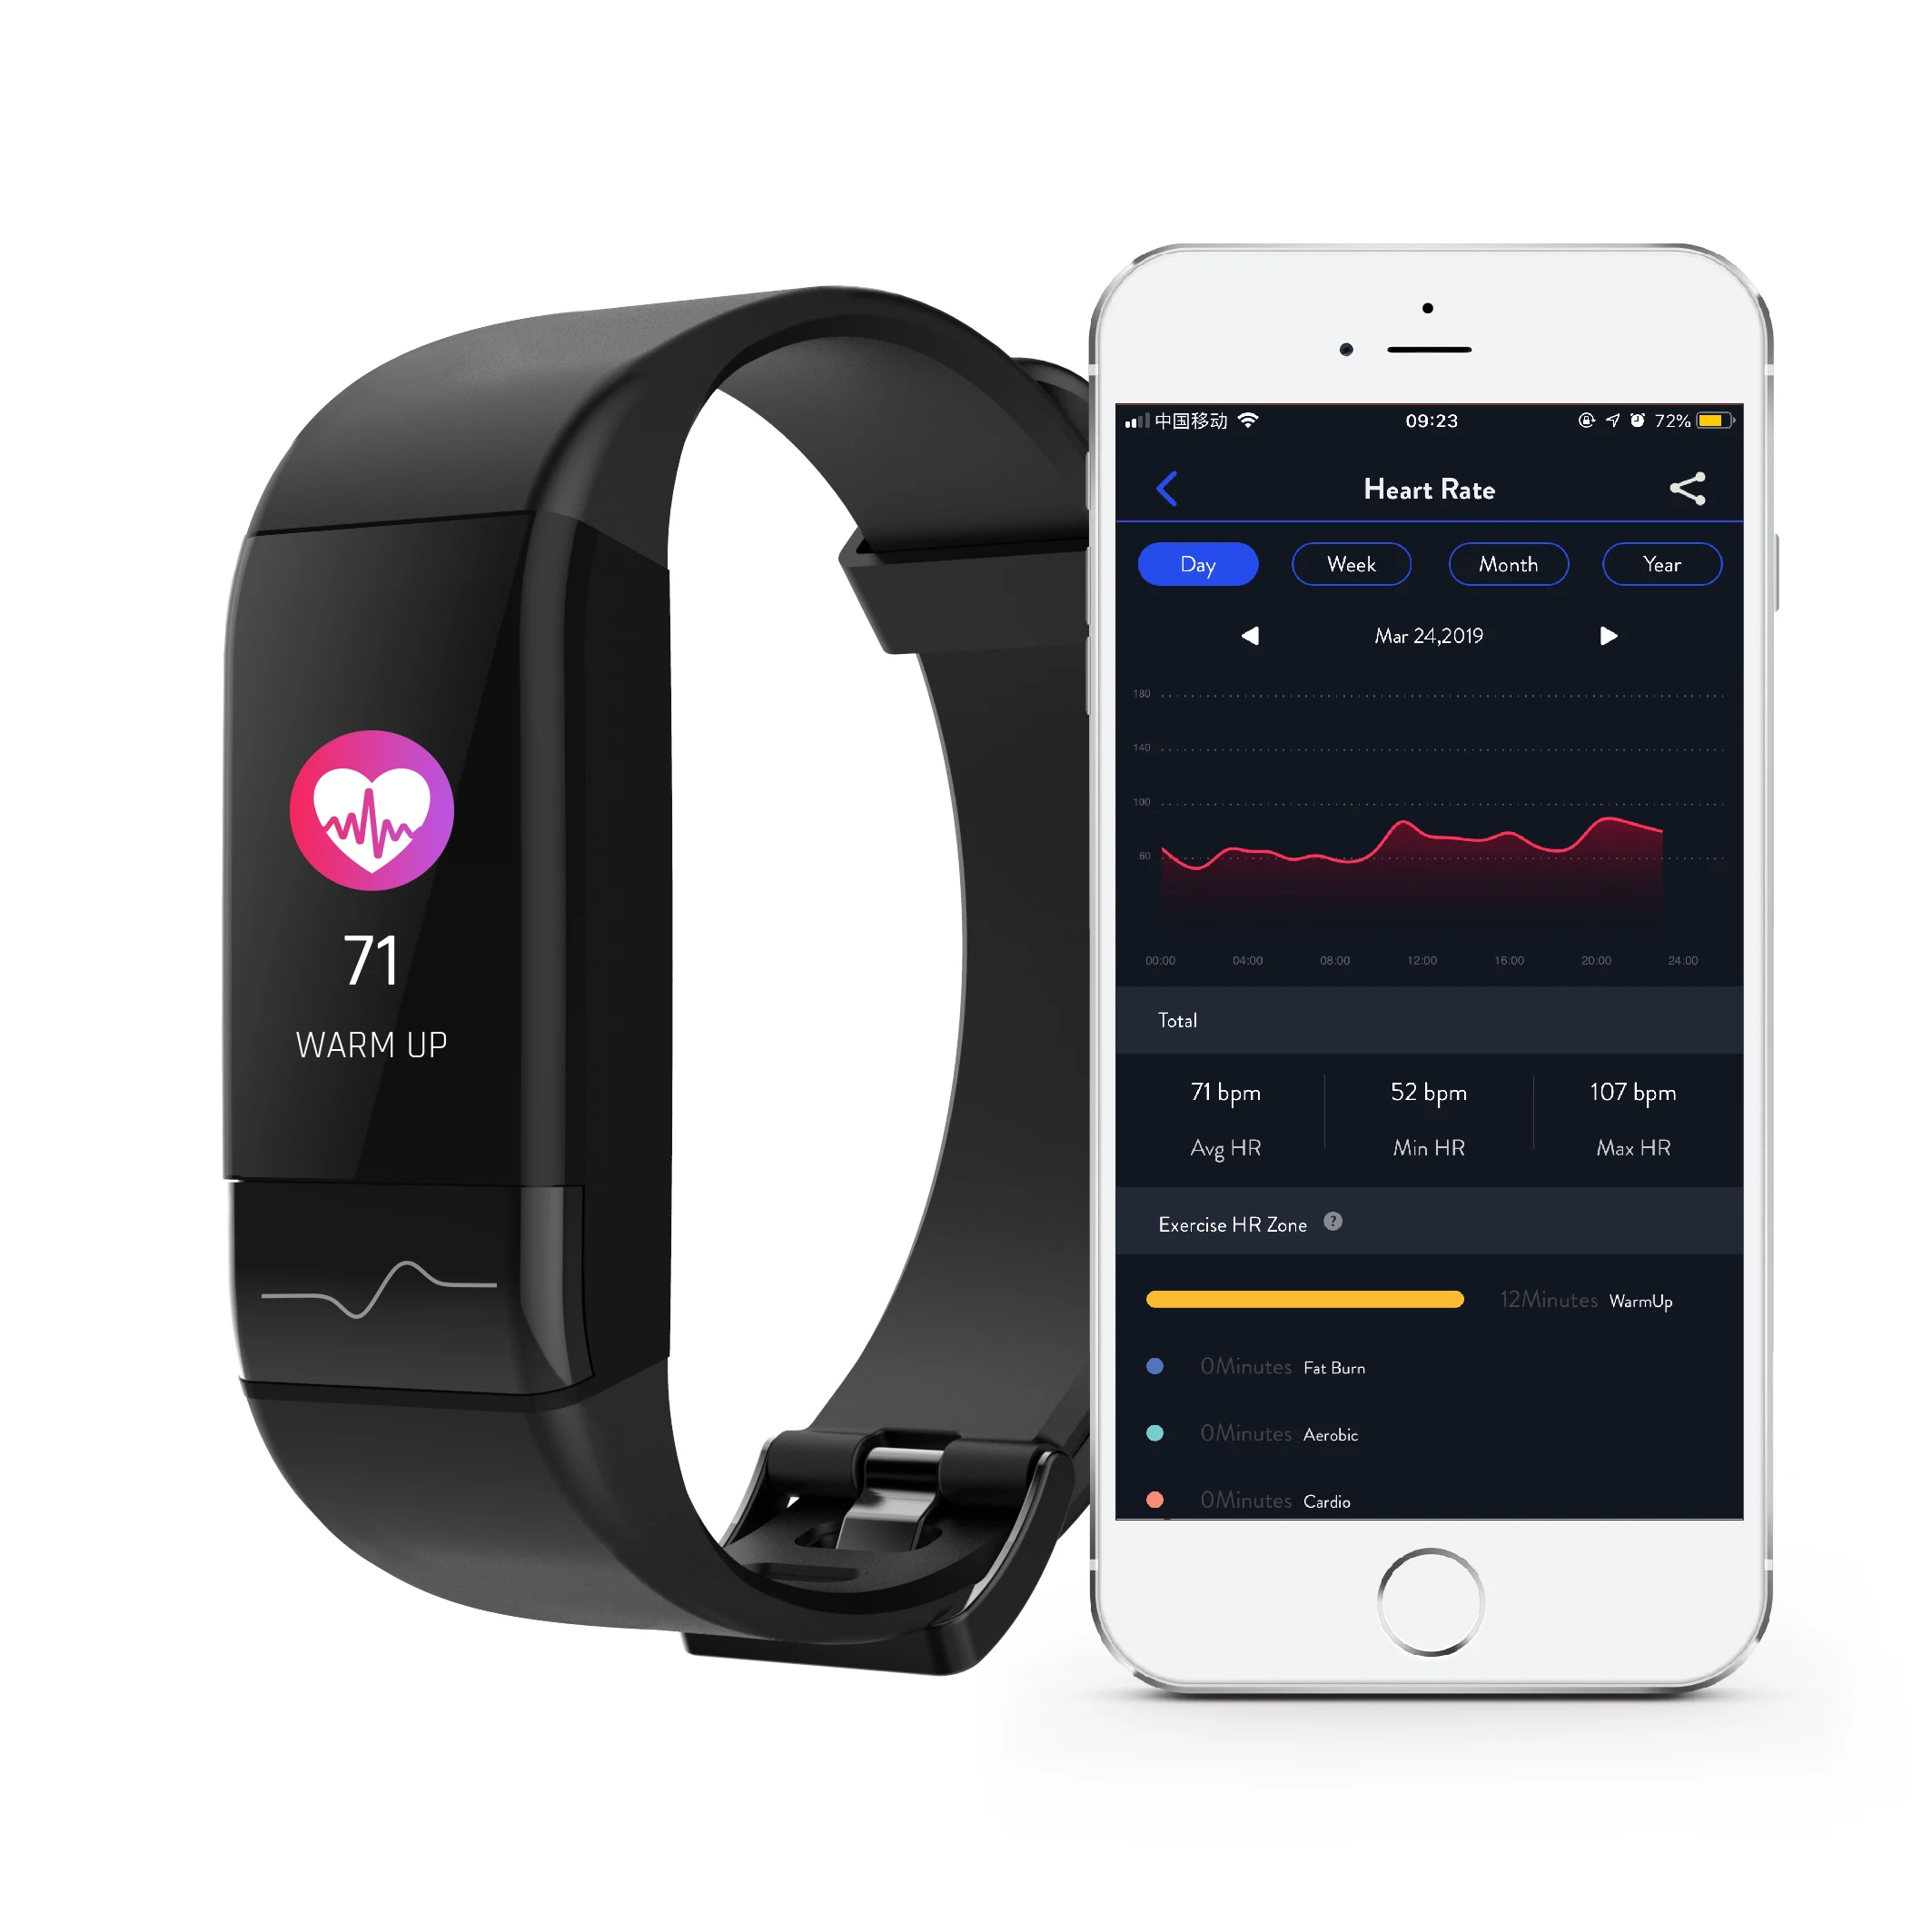 

J-Style 1790 ECG PPG smart band for heart rate, blood pressure, HRV, stress, sleep monitoring 0.96 TFT color screen tracker, Black, blue, or oem color